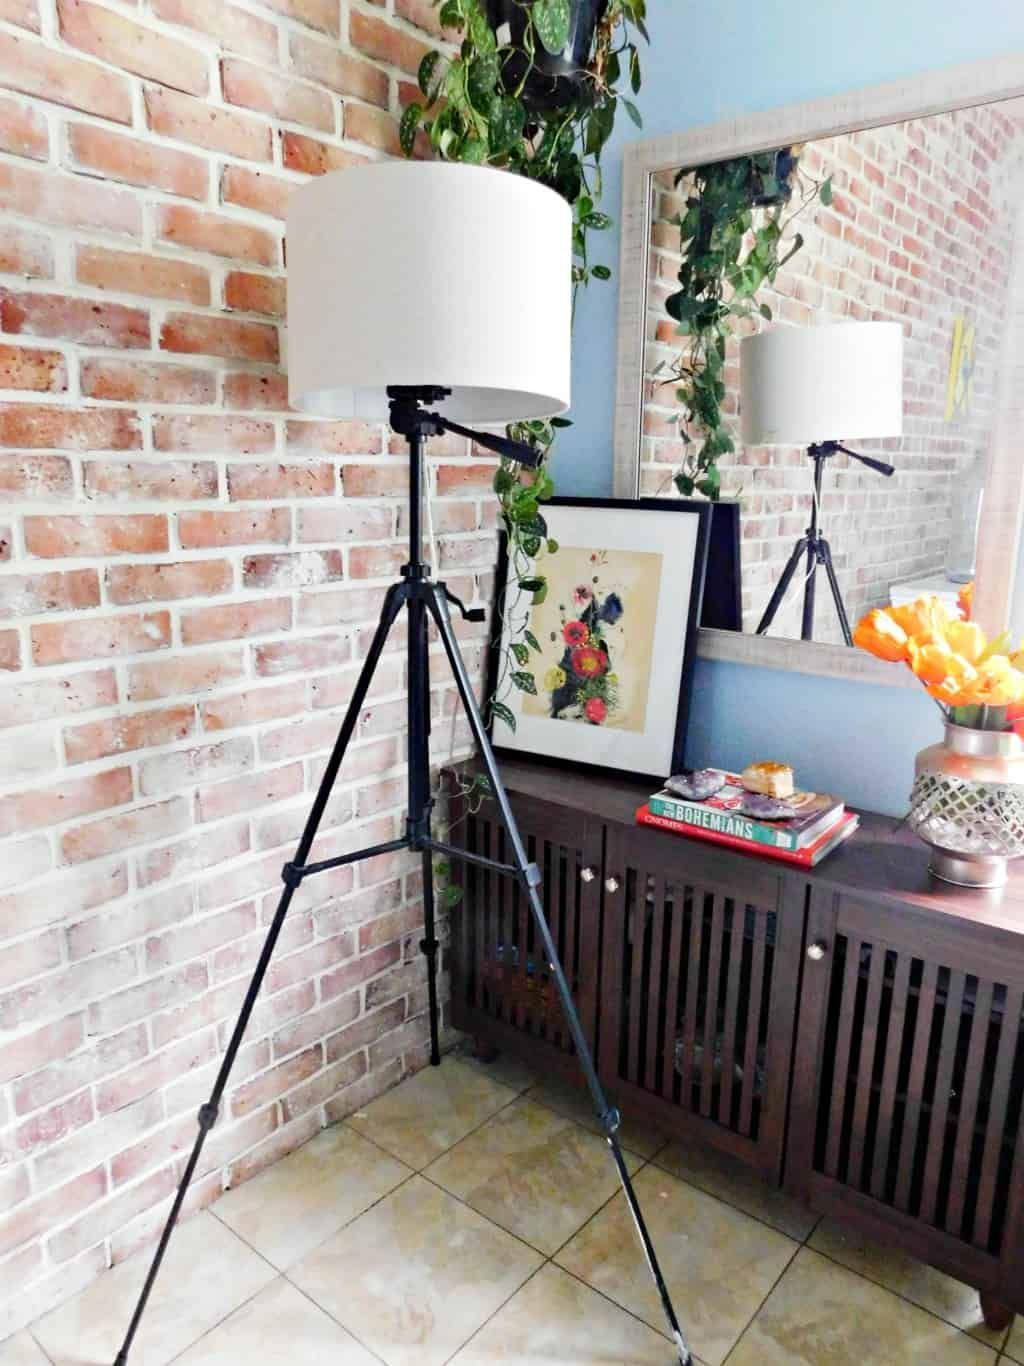 Make This Diy Floor Lamp With A Camera Tripod And Lamp Kit intended for dimensions 1024 X 1366